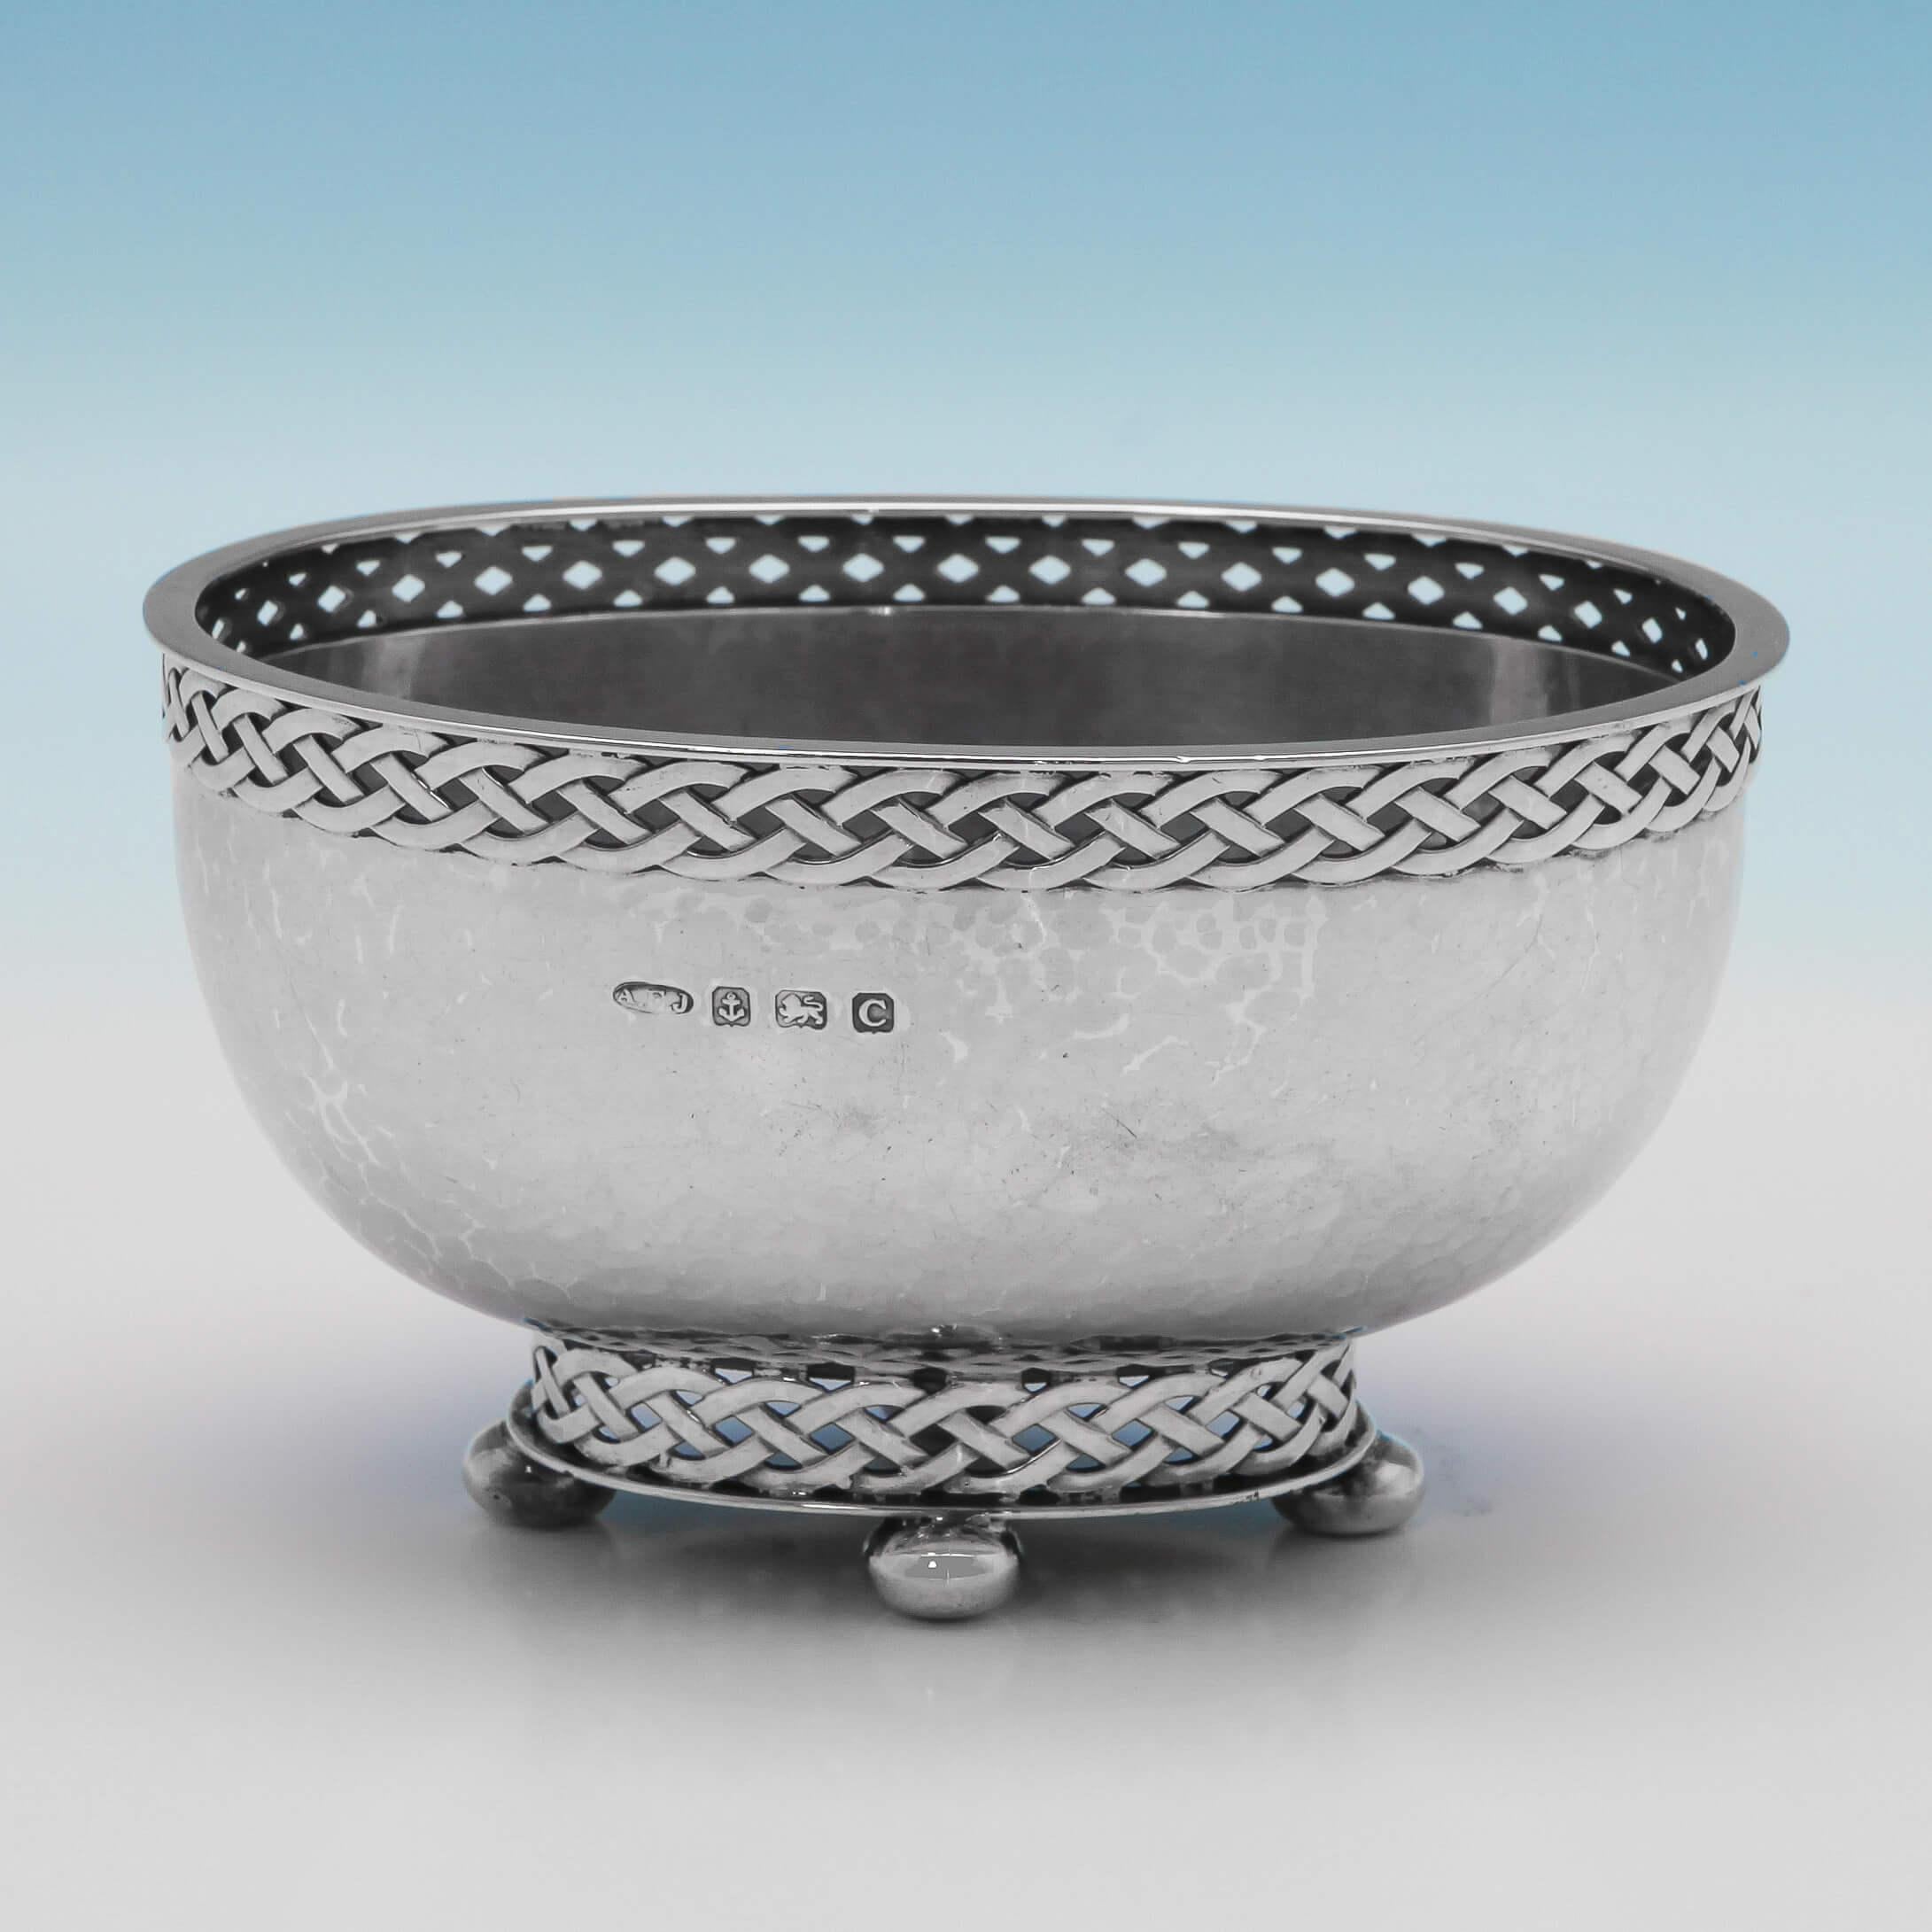 Hallmarked in Birmingham in 1927 by A. E. Jones, this charming, Sterling Silver, Arts & Crafts Bowl features a hand-hammered oval body, ball feet and Celtic Knot pierced borders around the base and rim. The bowl measures 3